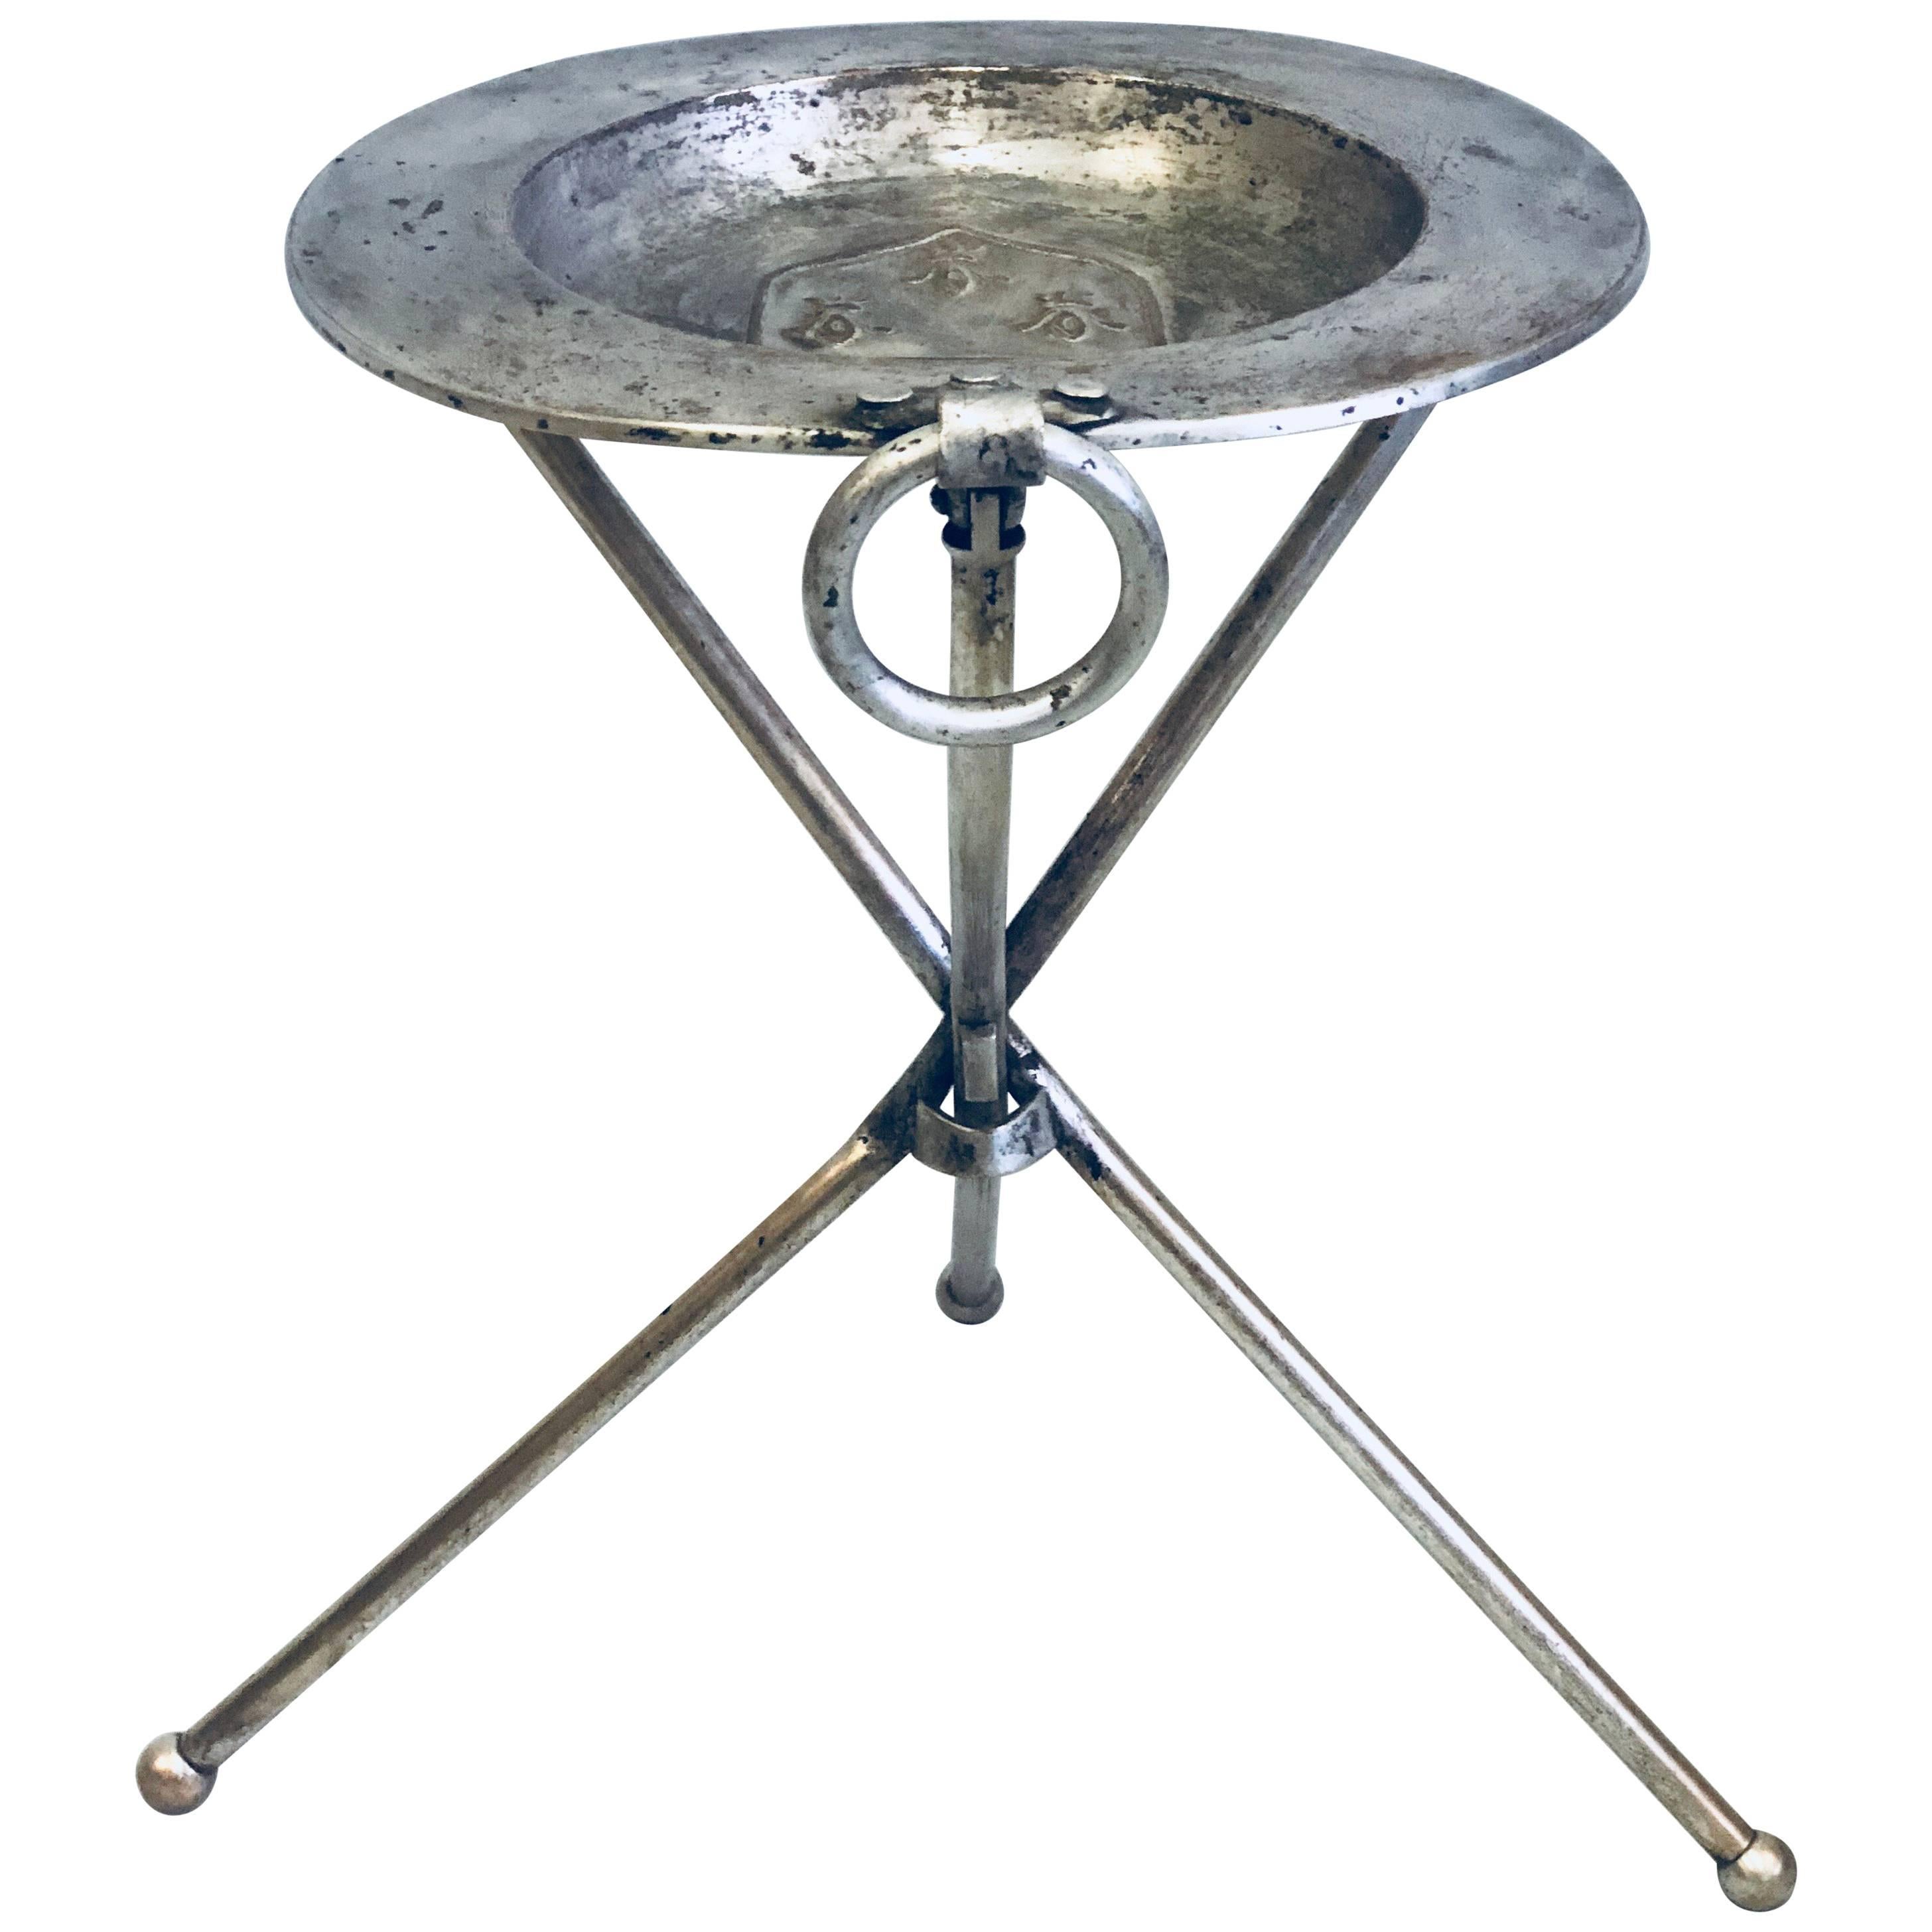 French Mid-Century Modern Neoclassical Silvered Brass Side Table or Gueridon